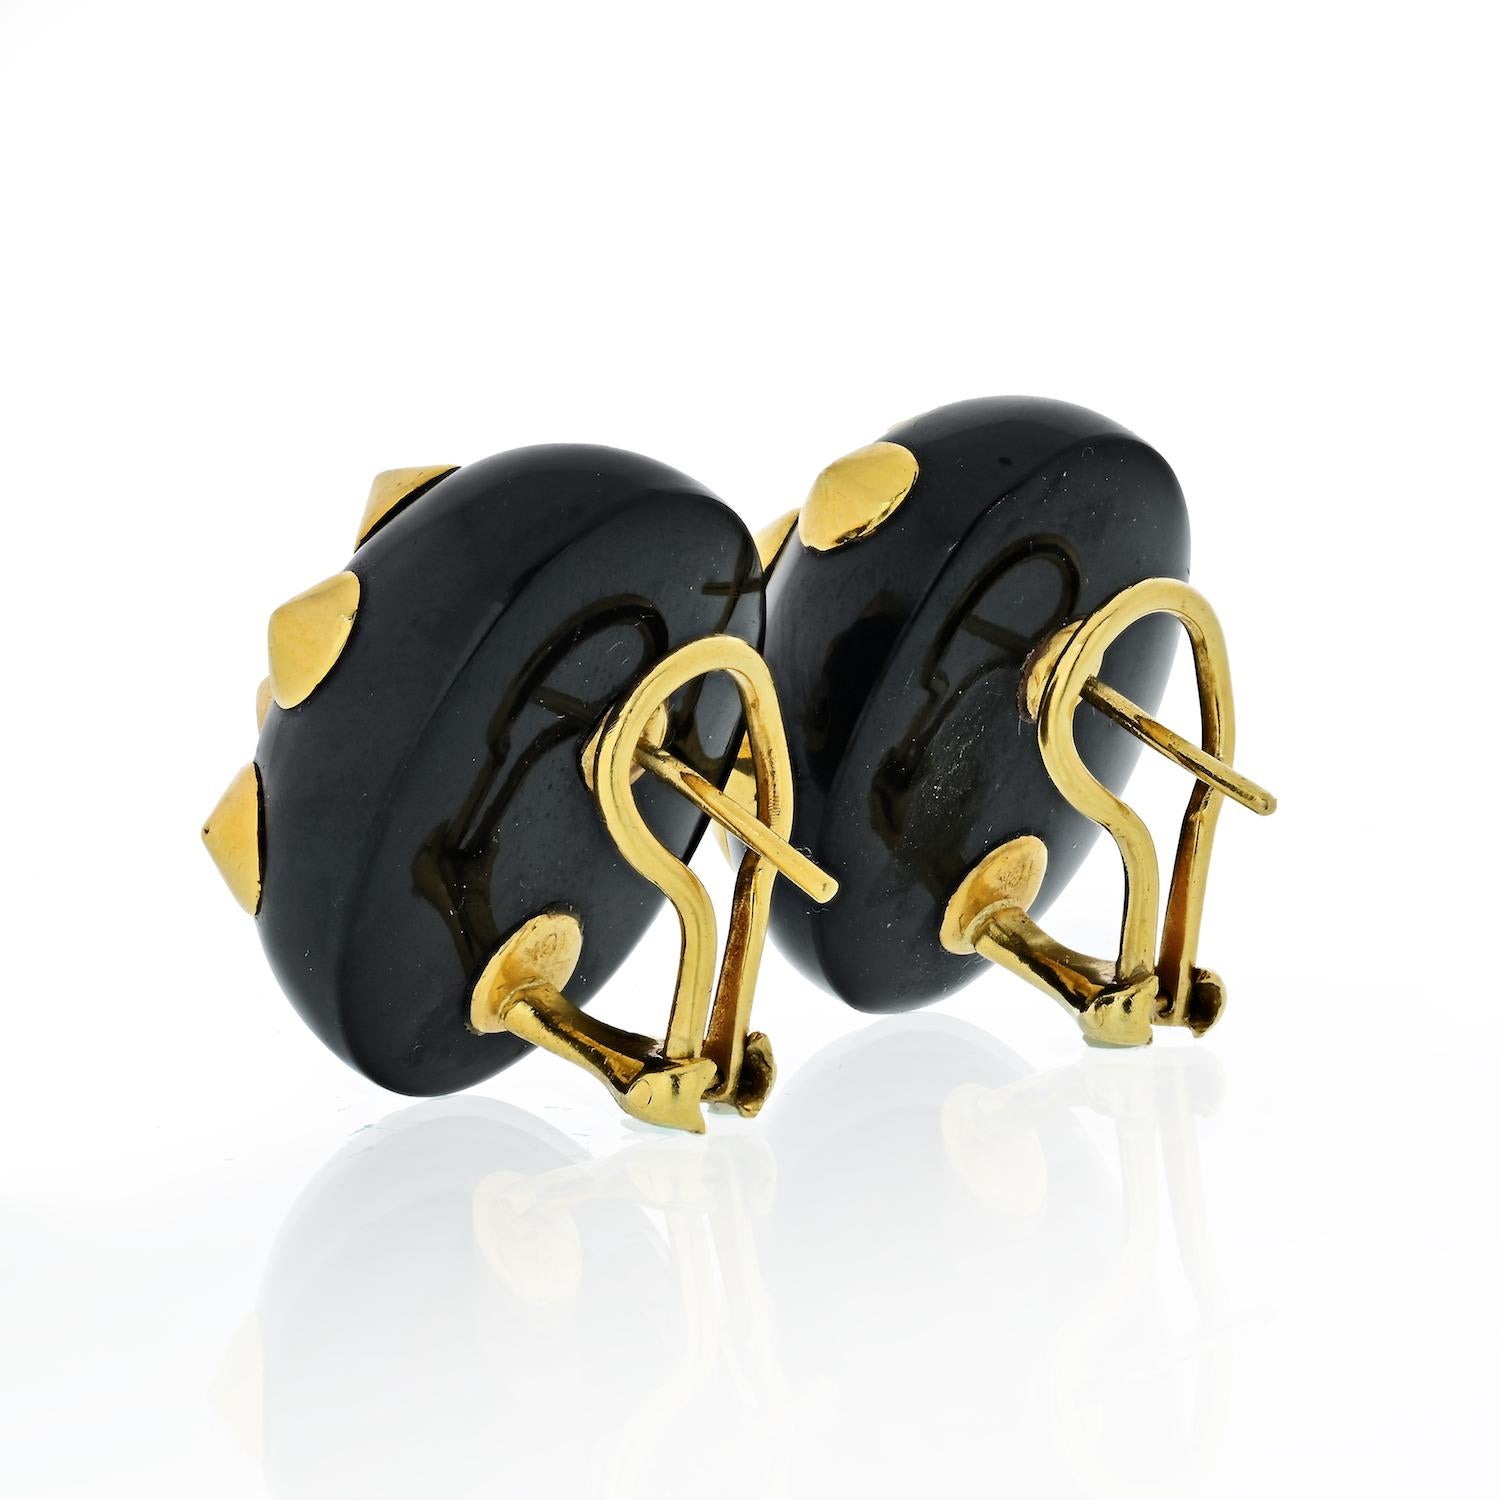 An iconic pair of 18k yellow gold earrings adorned with black jade. Crafted by famed designer Angela Cummings, the earrings measure 25mm x 21mm and weigh 26 grams.
Post backing for pierced ears. 